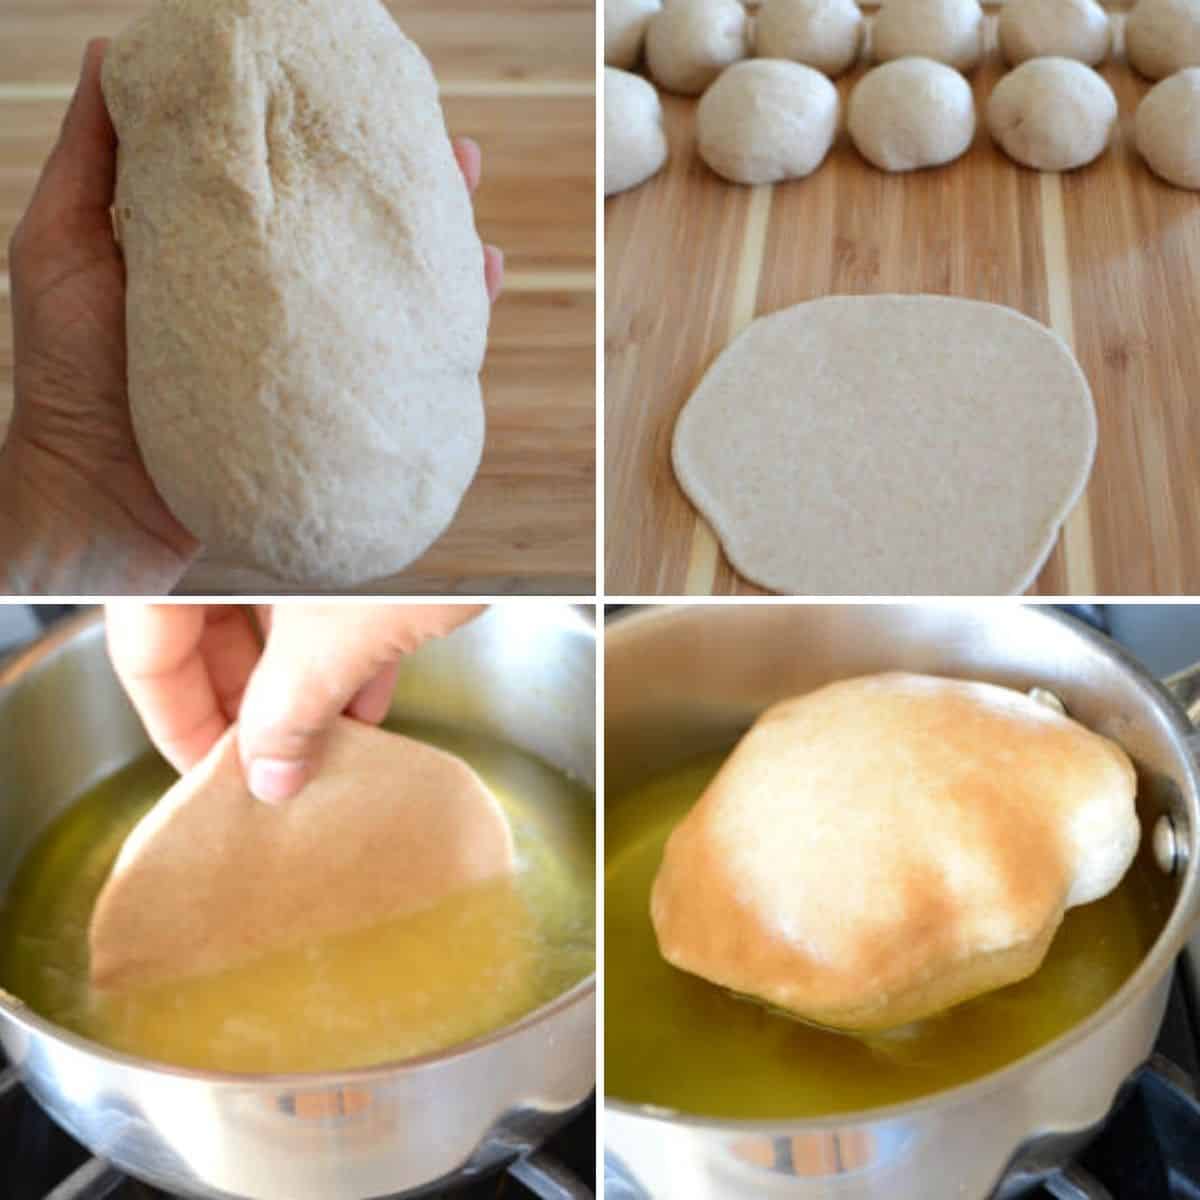 A collage of four images showing how to make this recipe.